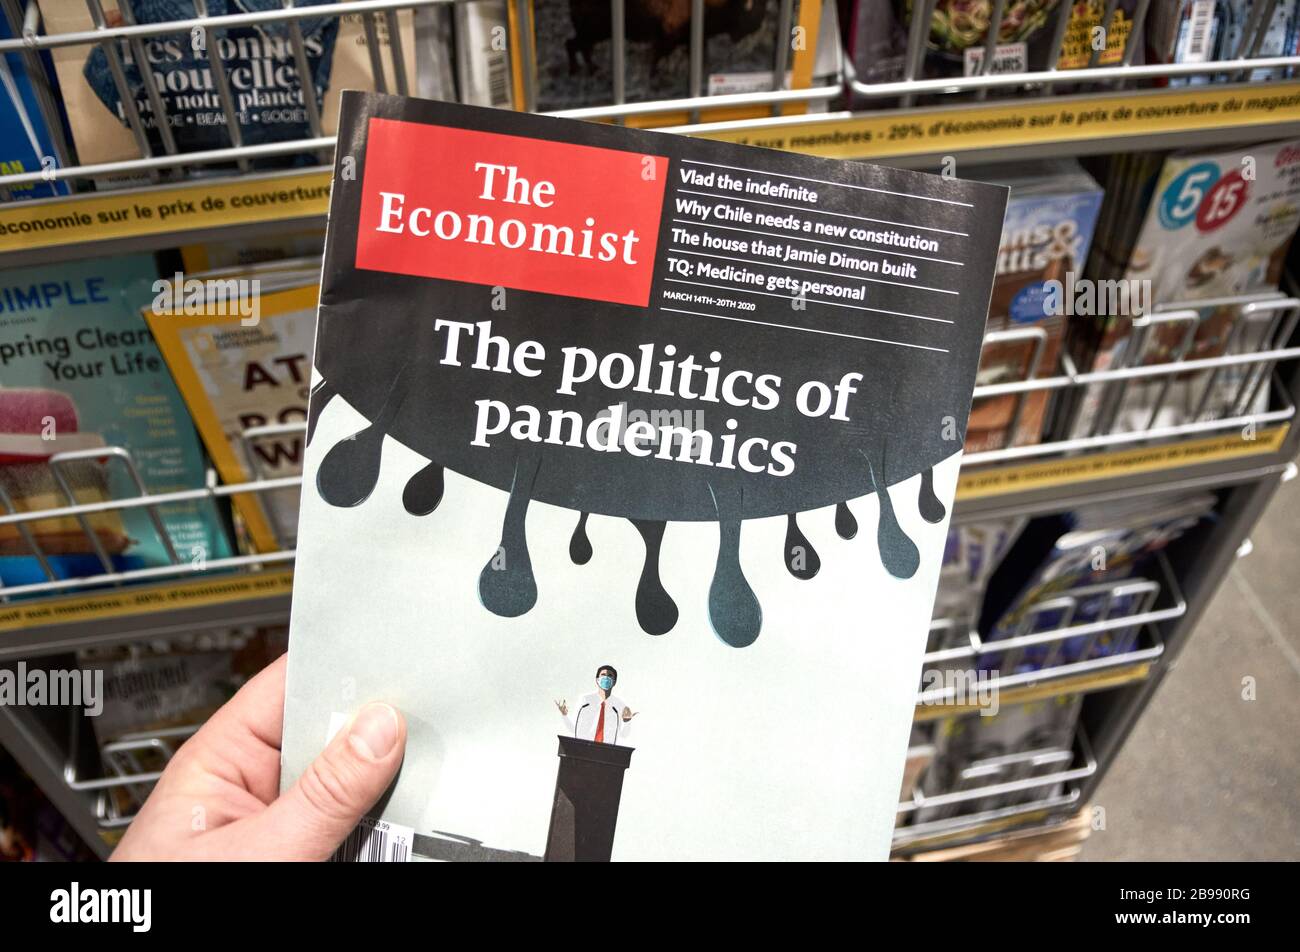 Montreal, Canada - March 23, 2020: The Economist magazine with The Politics of Pandemics title. The Economist is an English-language weekly magazine-f Stock Photo